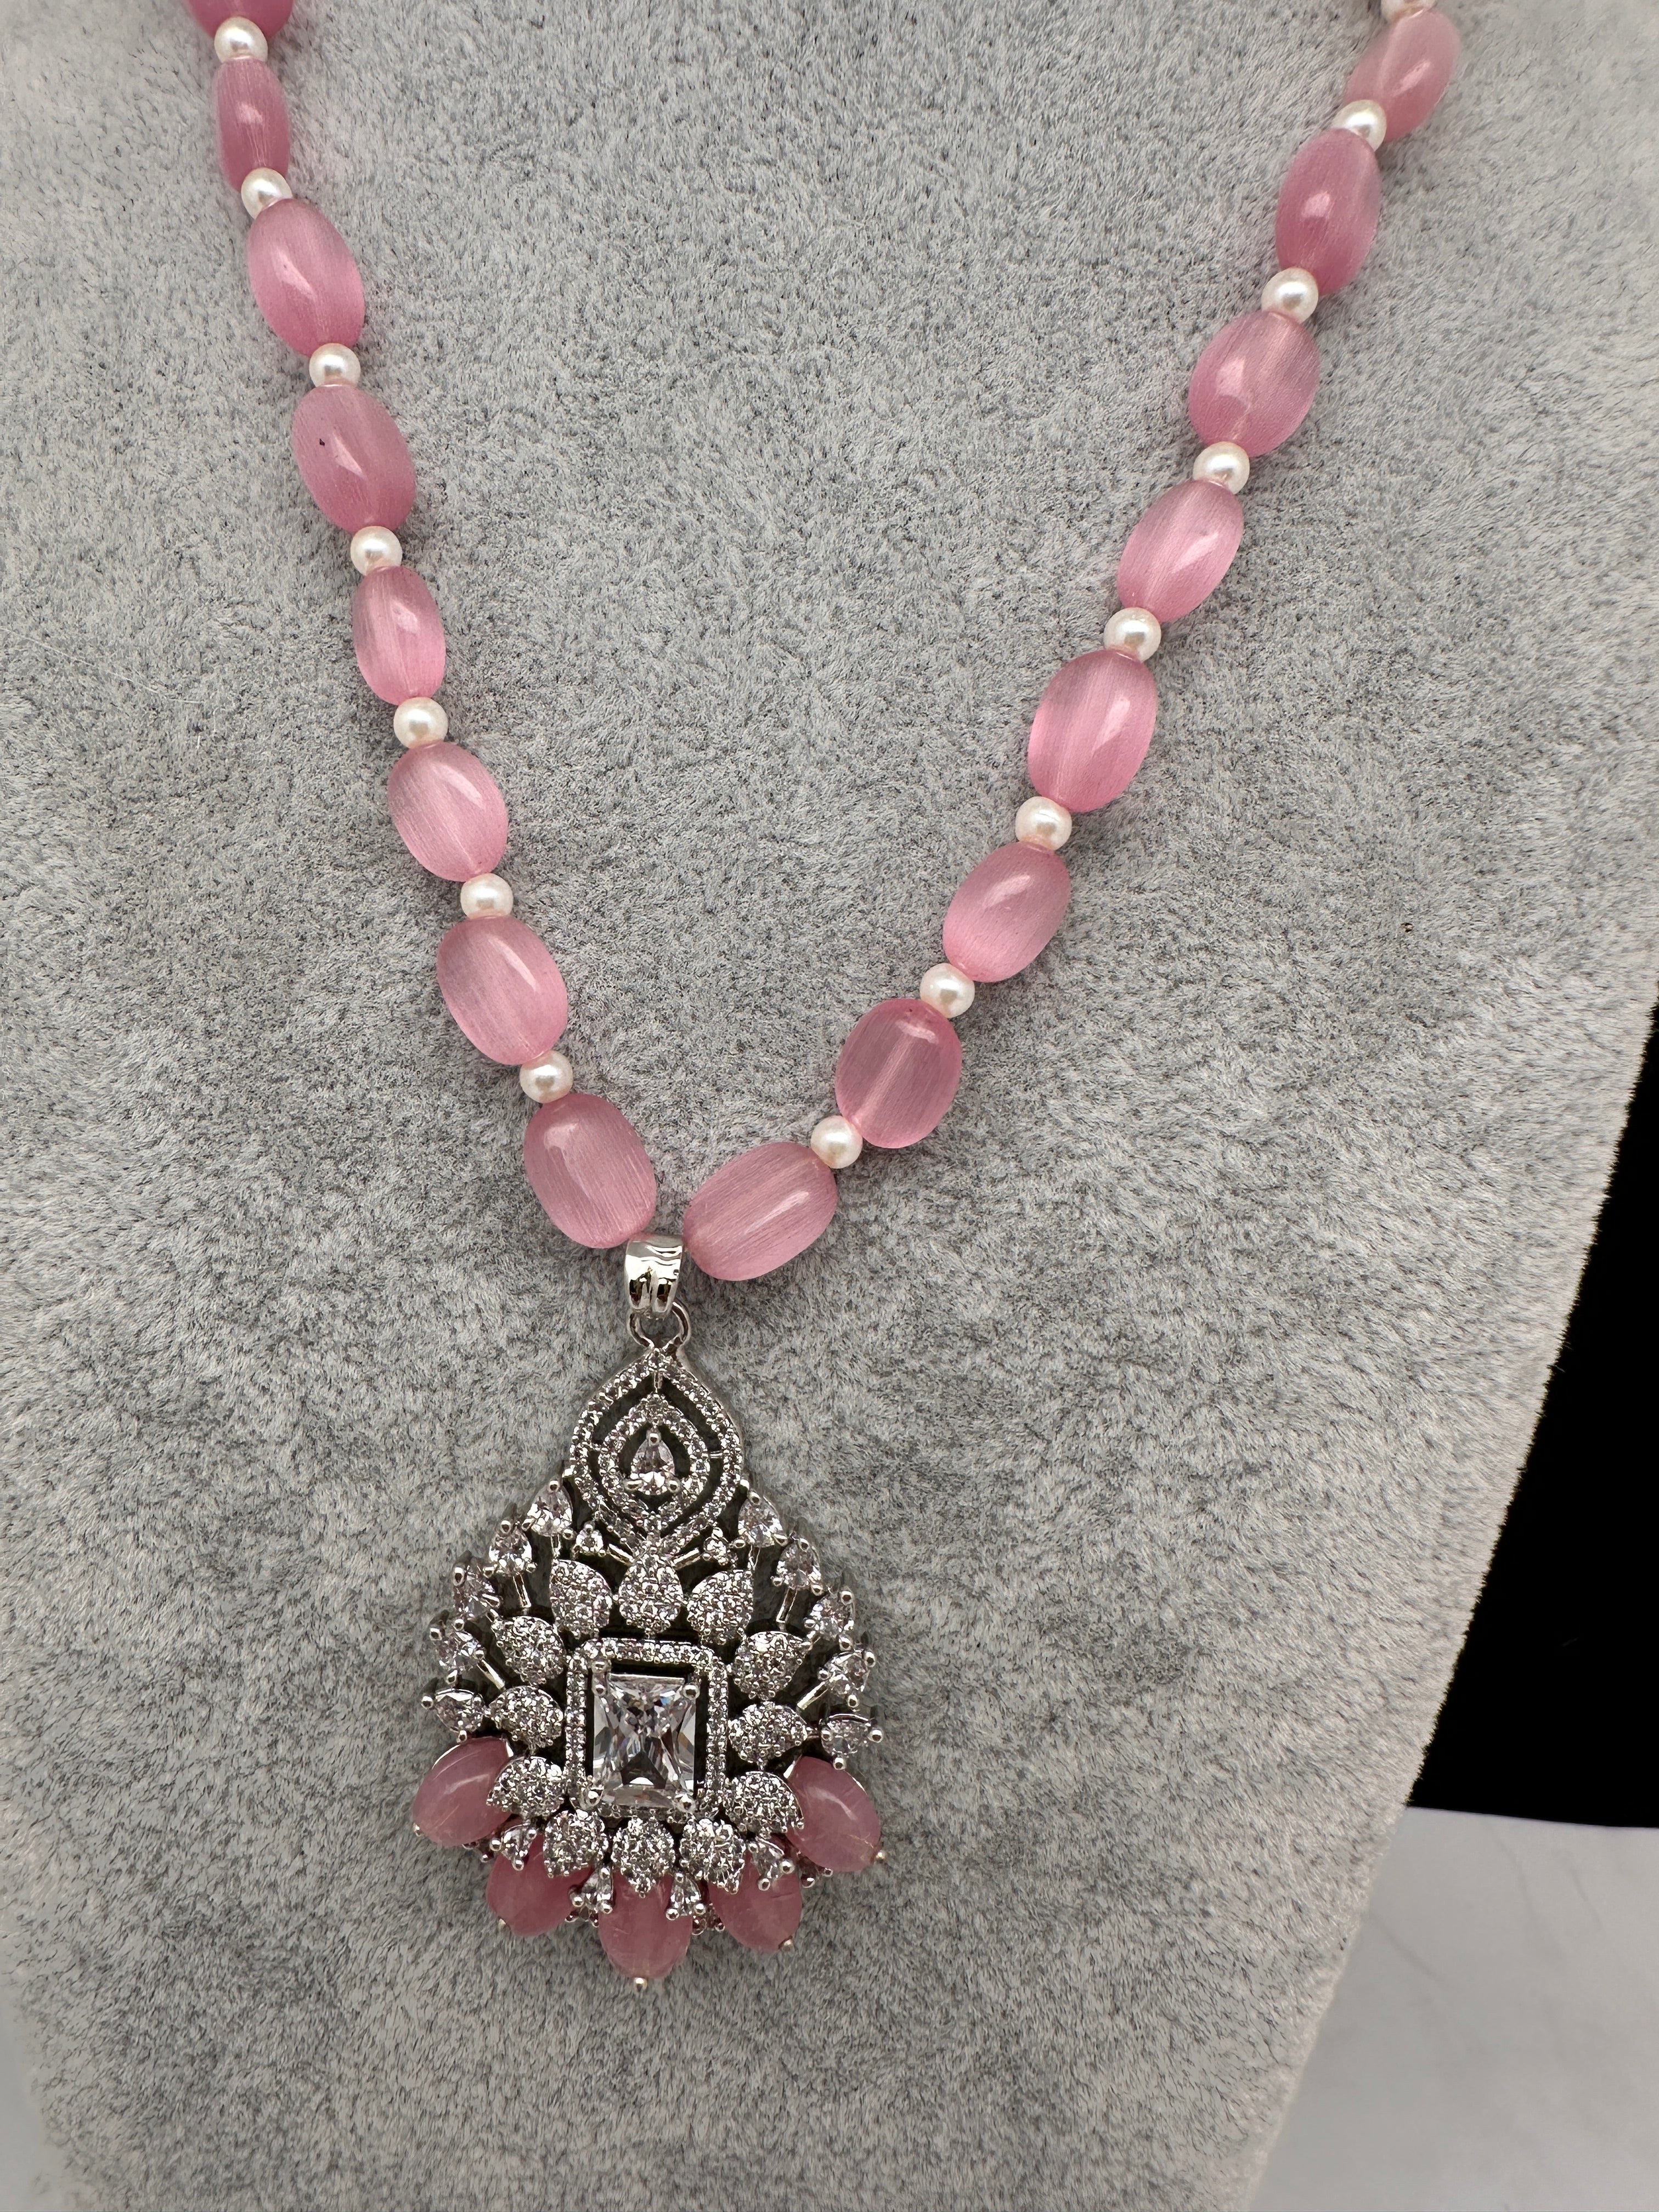 Paparazzi BEWITCHING BEADING pink SEED BEAD necklace | eBay